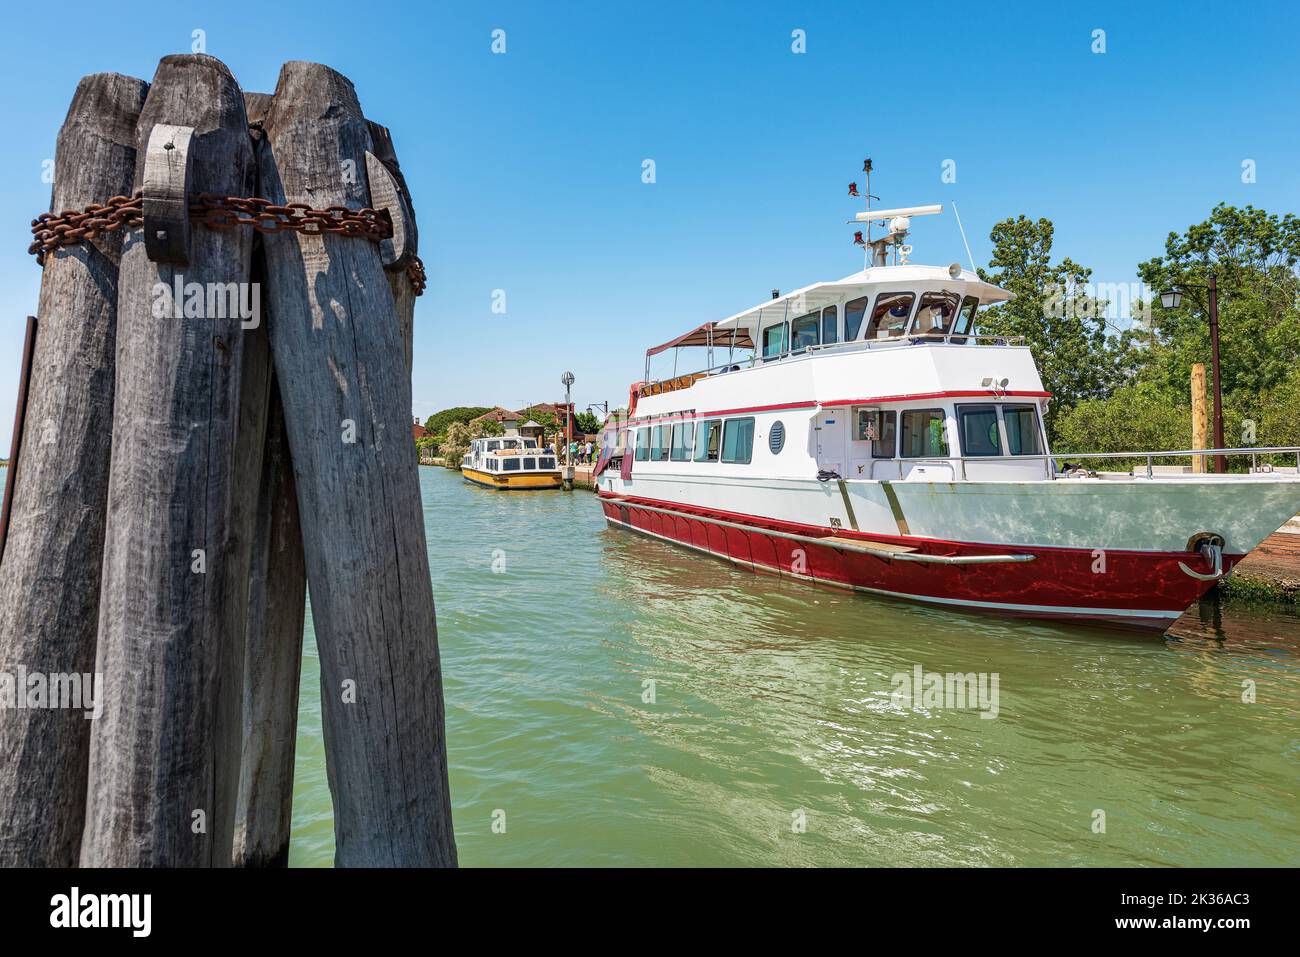 Two ferries moored in the port of the Torcello Island, Venetian lagoon, Venice, Veneto, Italy, Europe. Large wooden poles called Briccola (Dolphin). Stock Photo